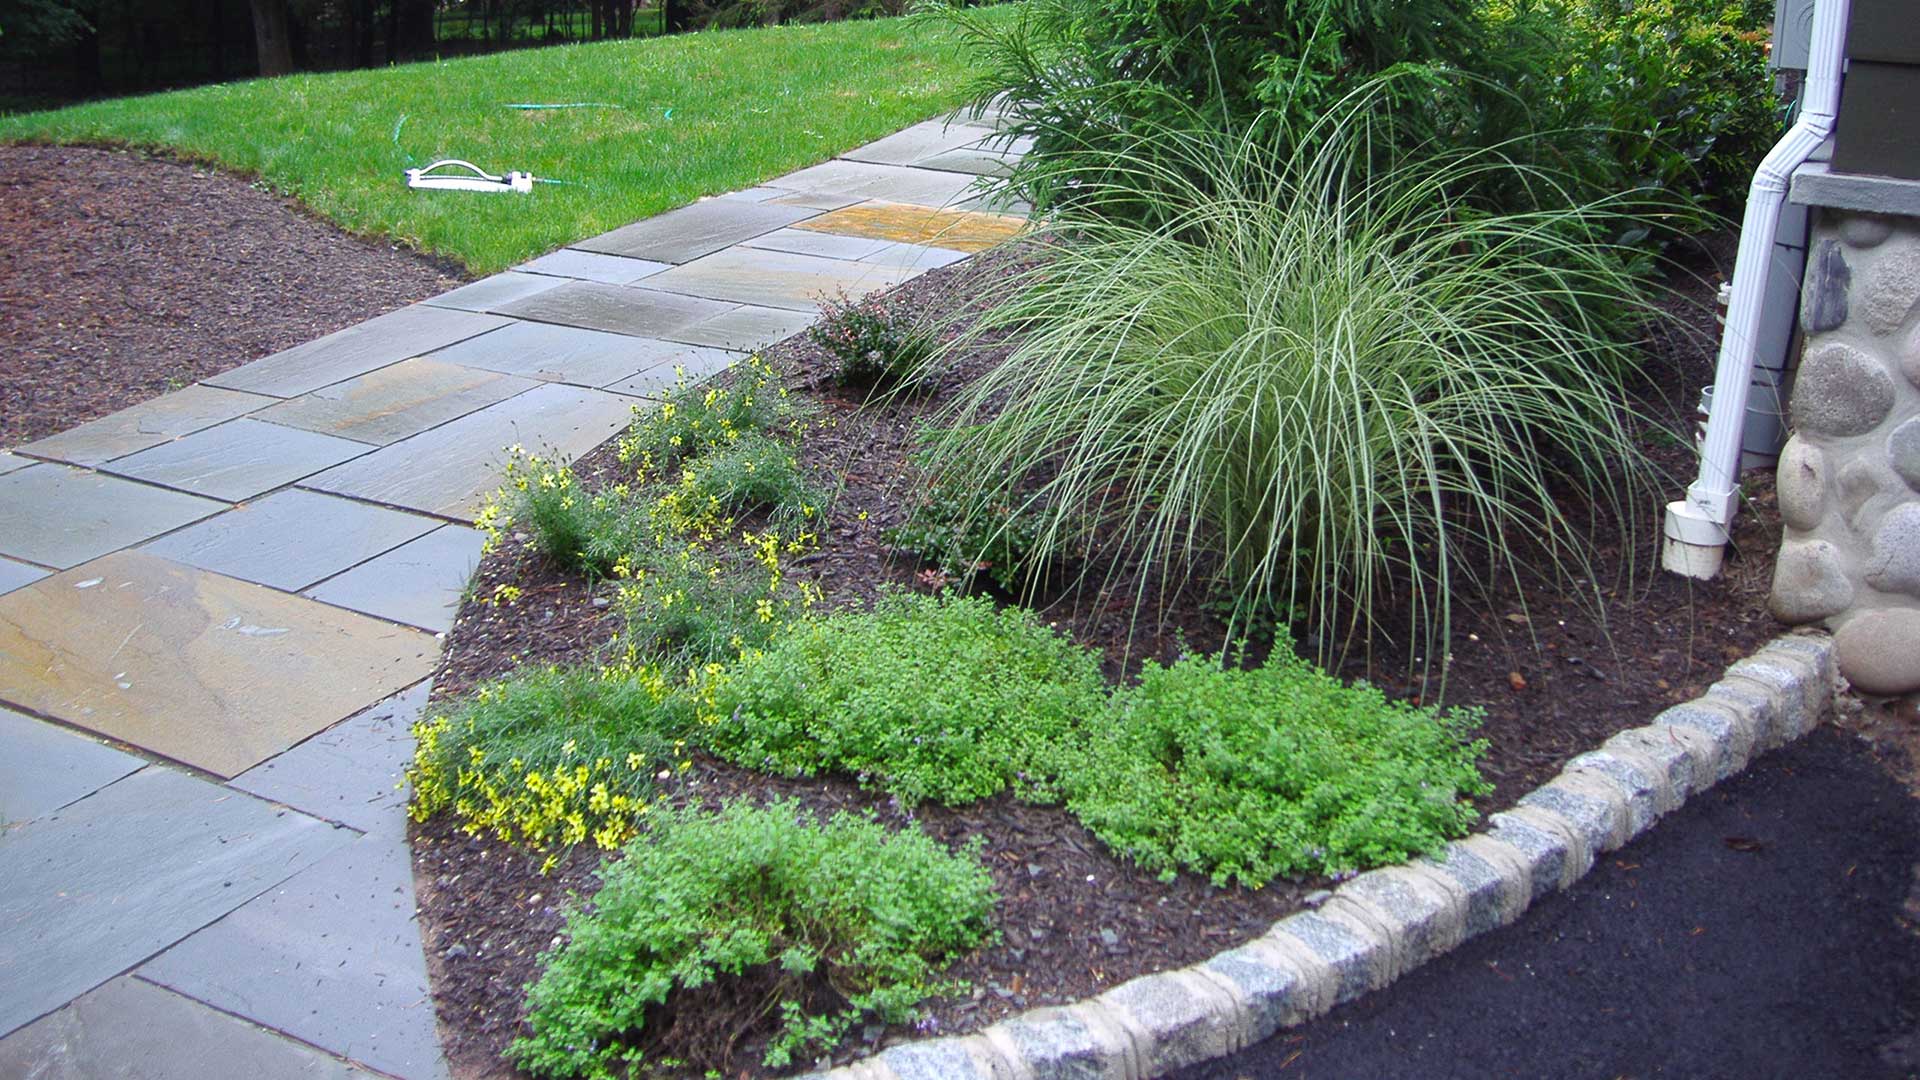 This home owner has opted to install a walkway that separates two large landscape beds.